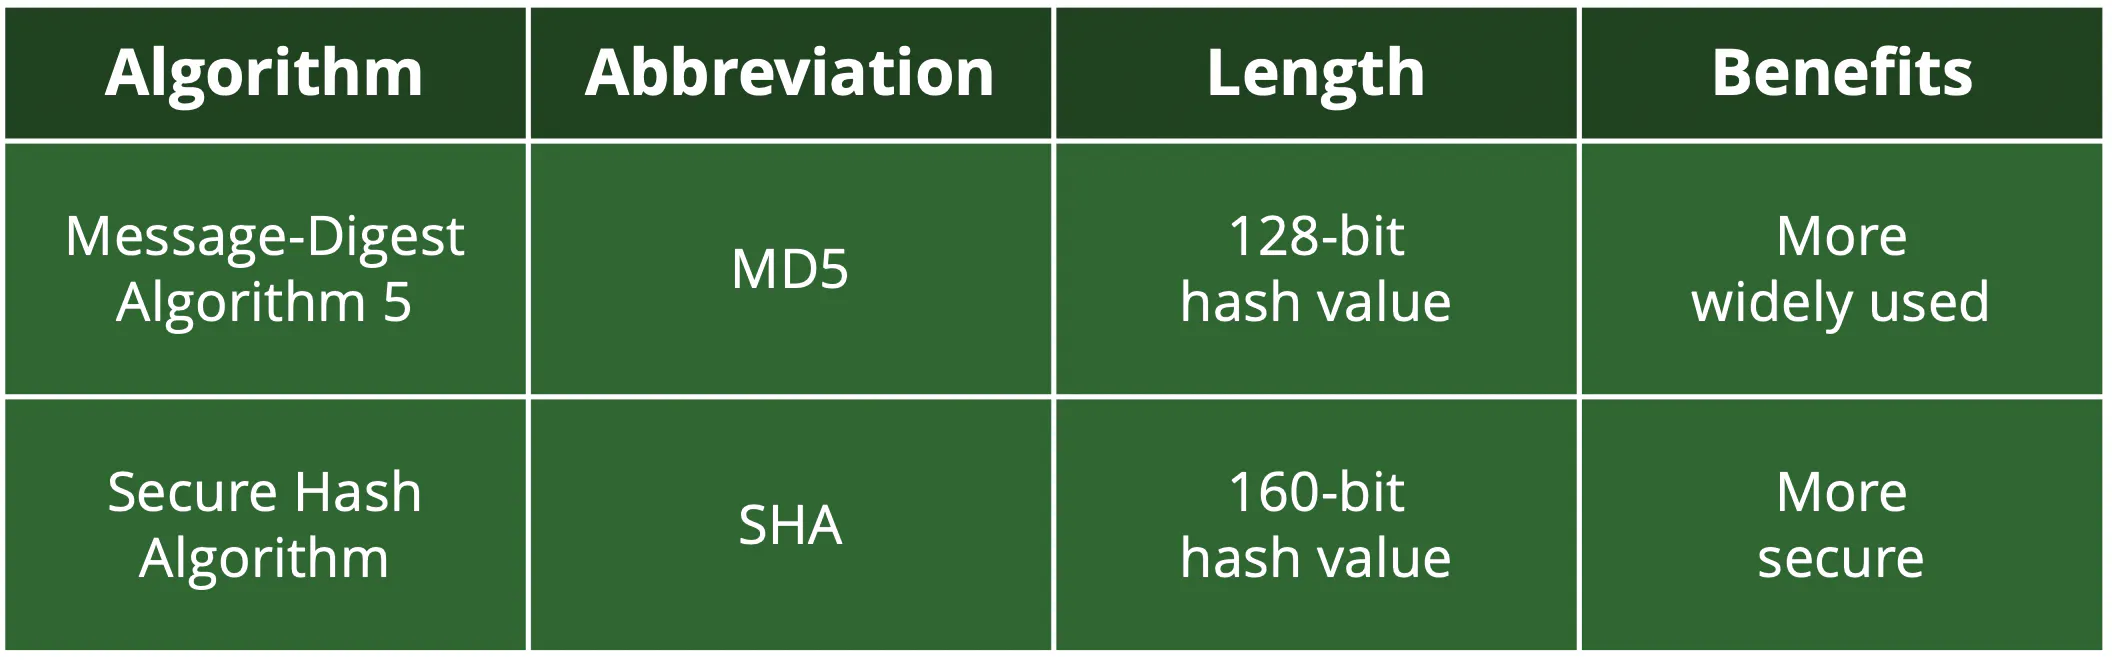 Two types of hashed algorithms are MD5 and SHA, while the former is more widely used the latter is more secure